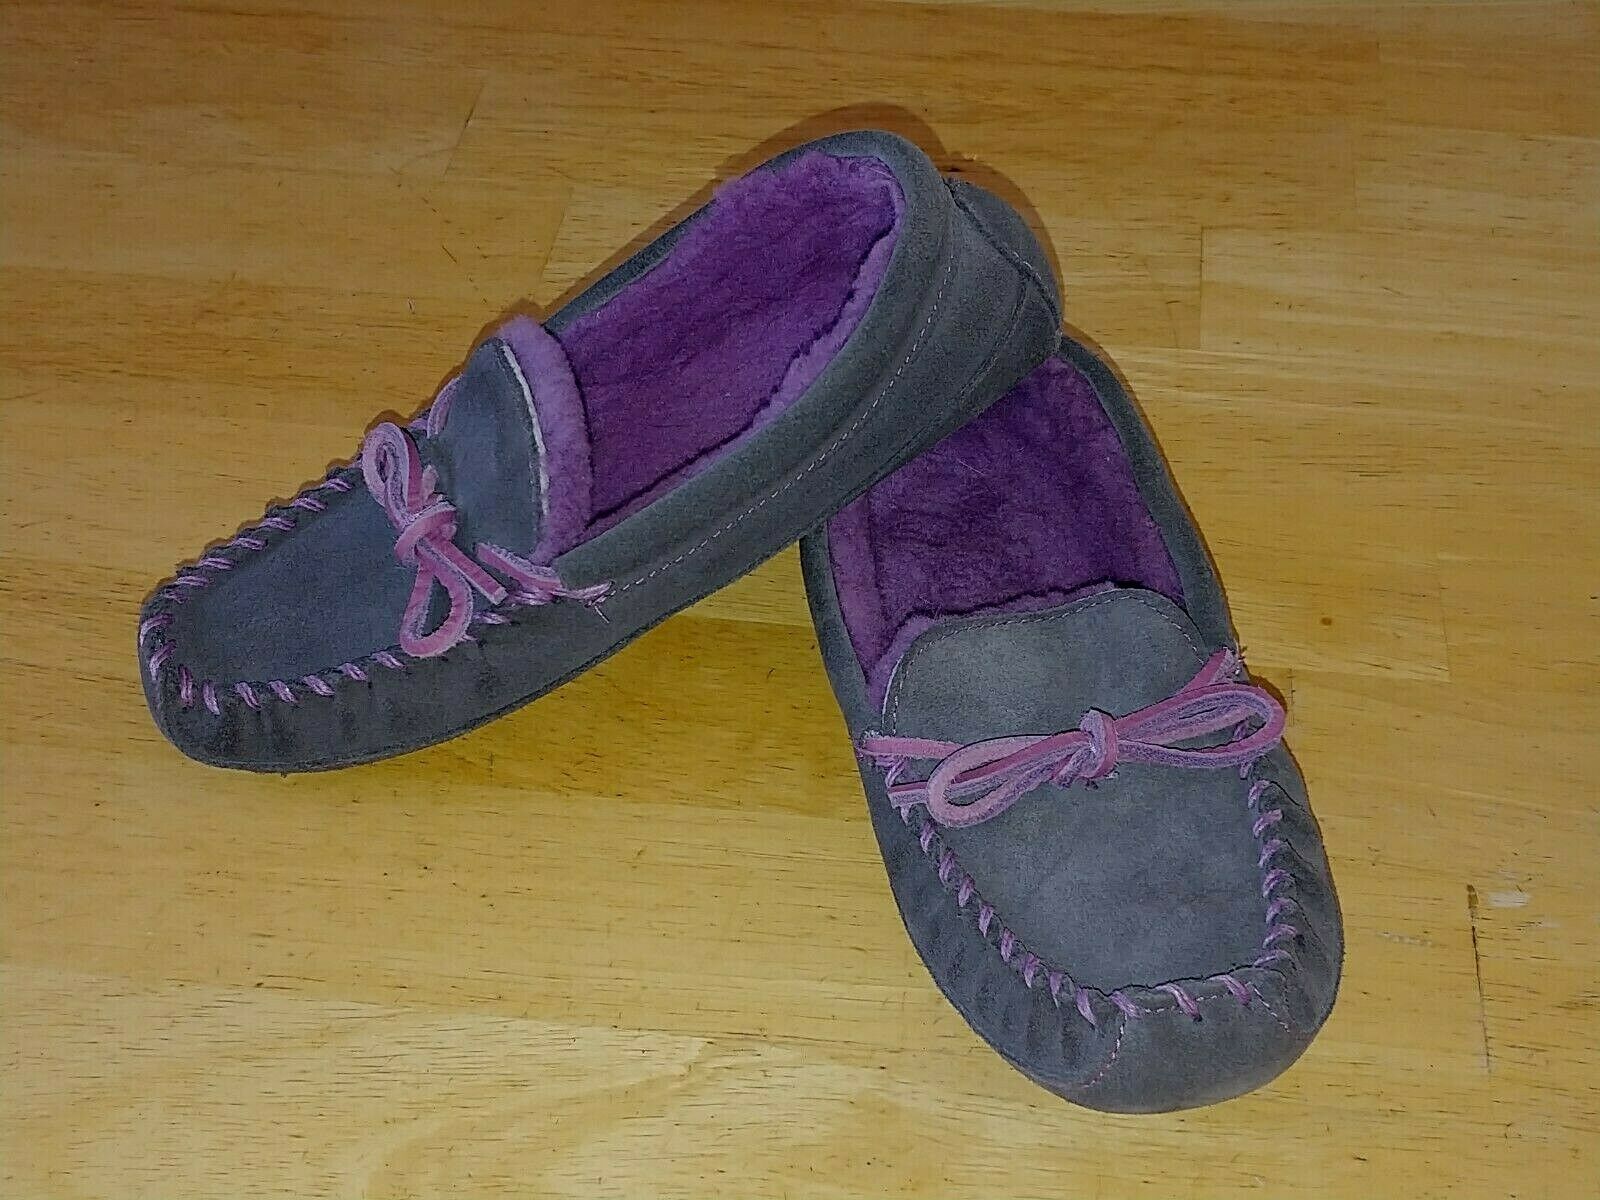 L.L. BEAN KIDS GRAPHITE SLIPPERS W/SHEARLING LINING-5-WORN ONCE-SUPER SOFT/COMFY - $19.95